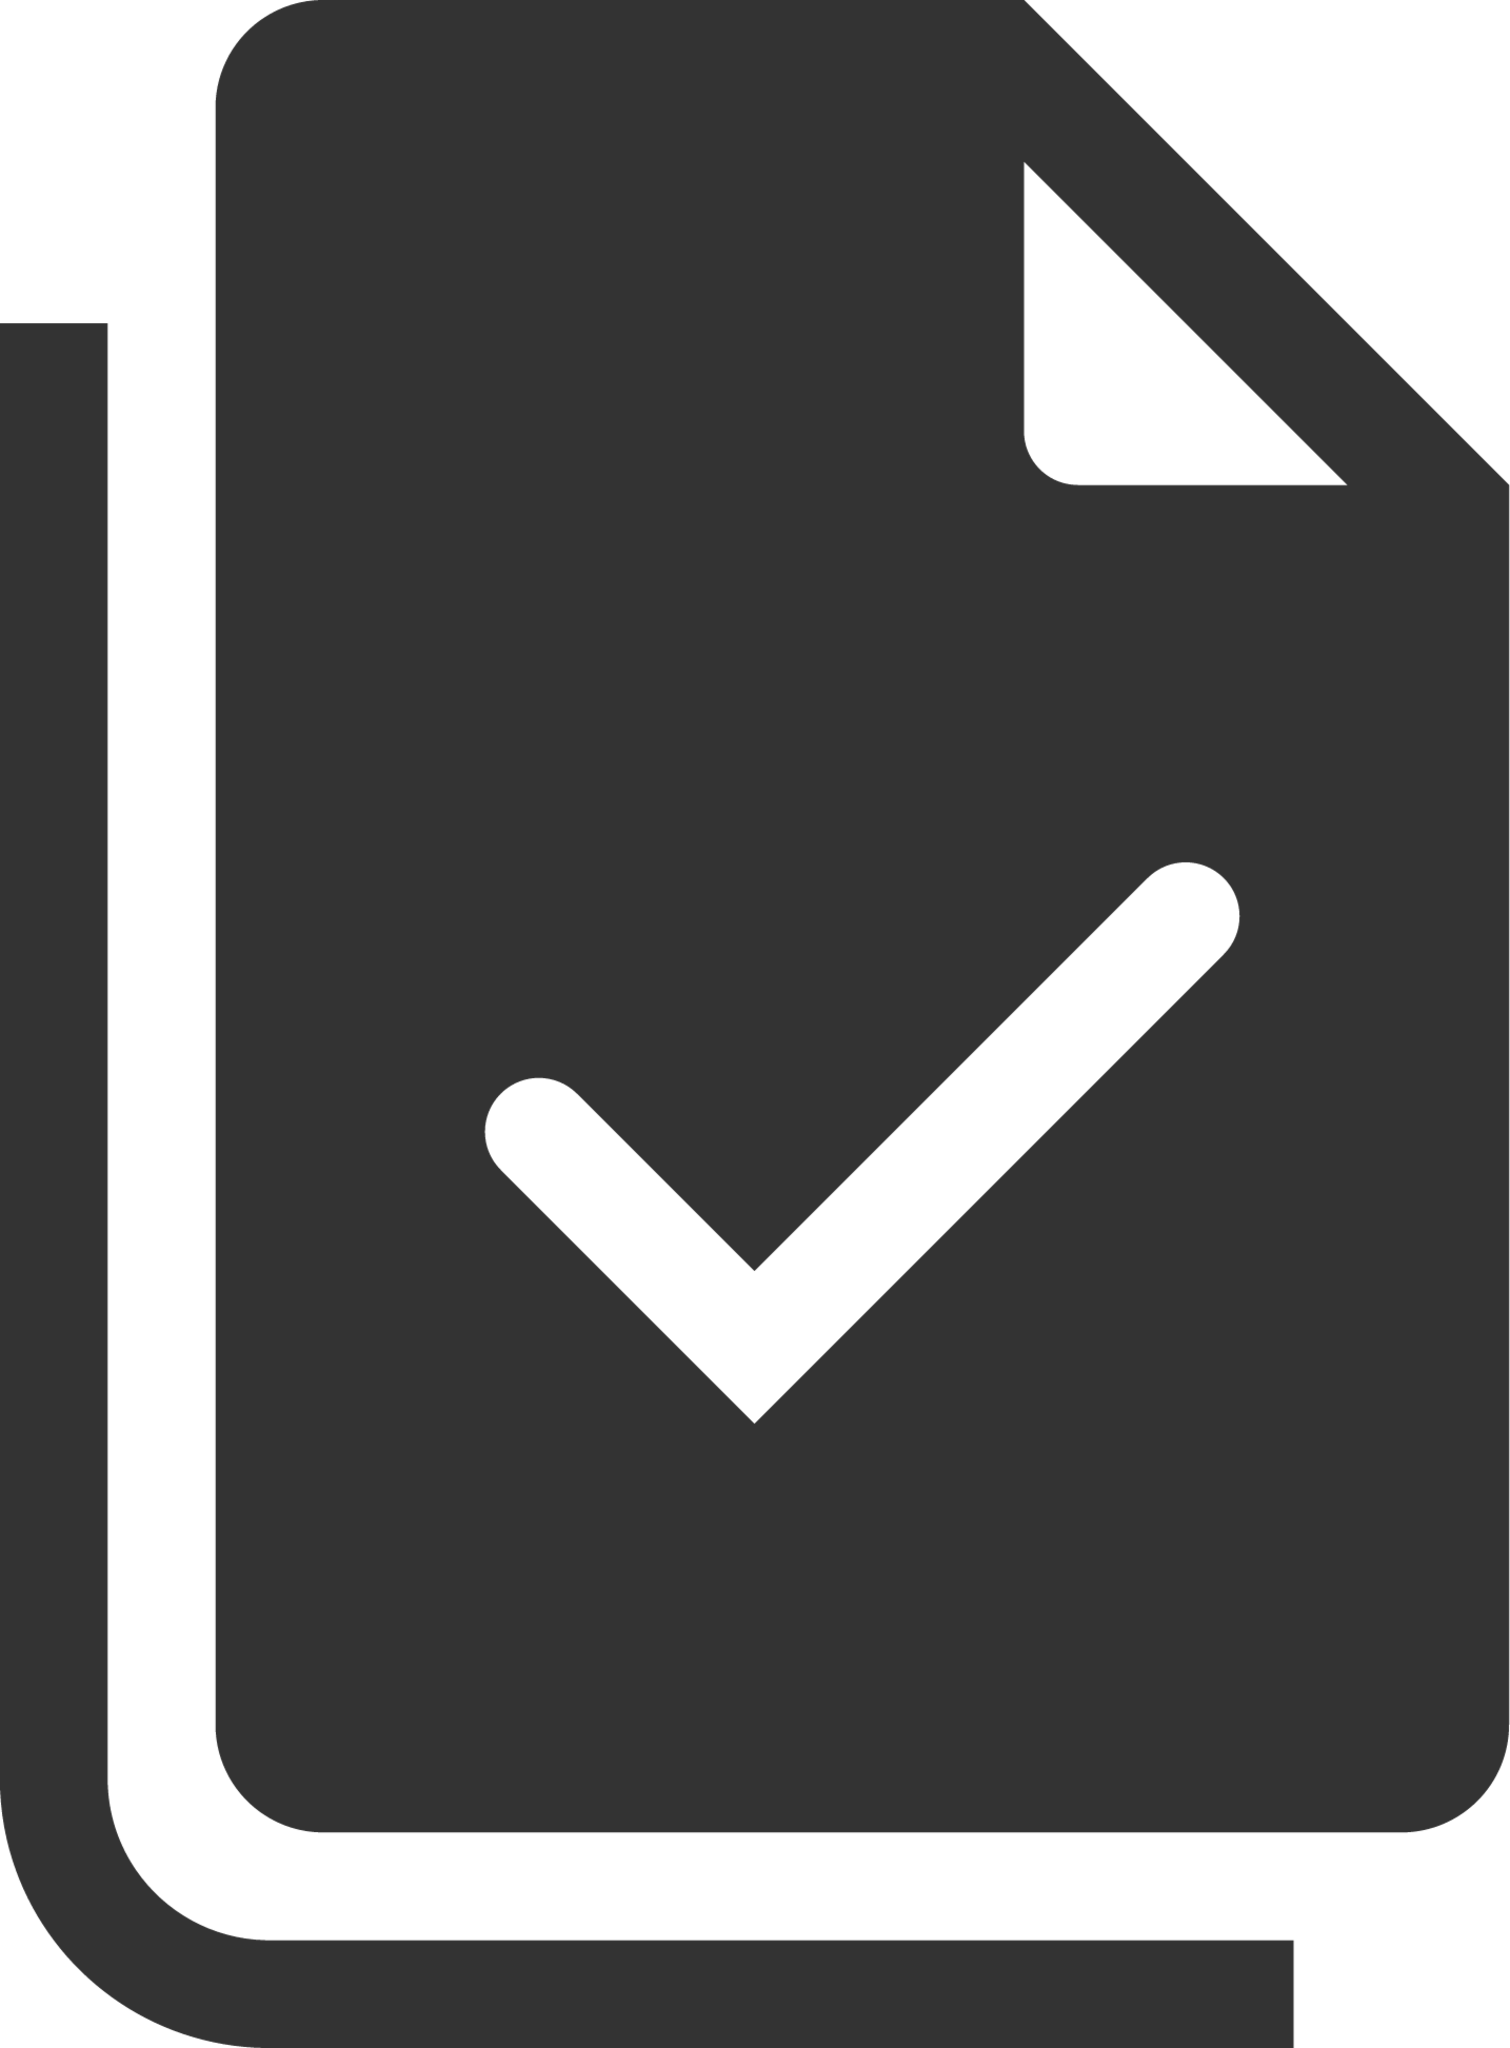 Approved Document icon